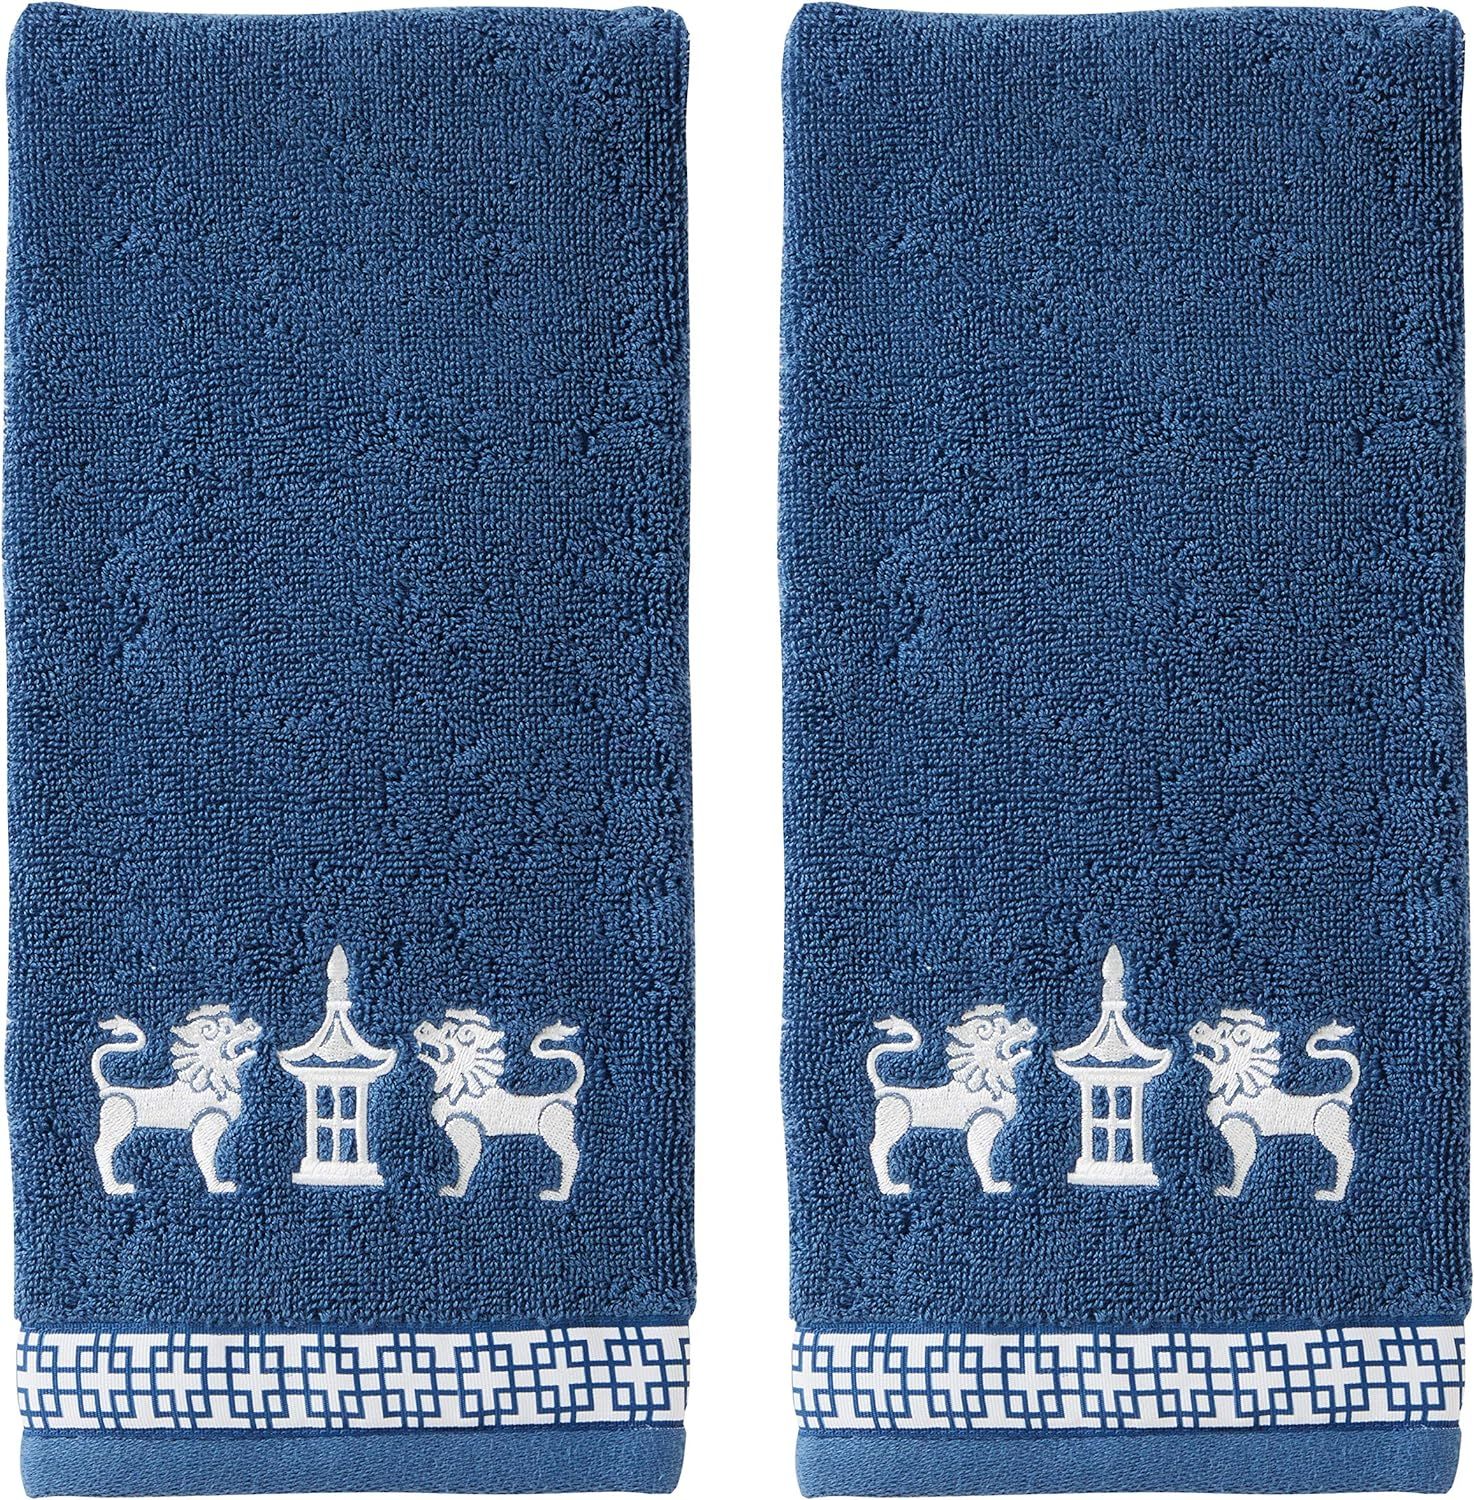 SKL HOME by Saturday Knight Ltd. Vern Yip Chinoiserie Hand Towel Set, Navy 2 Count | Amazon (US)